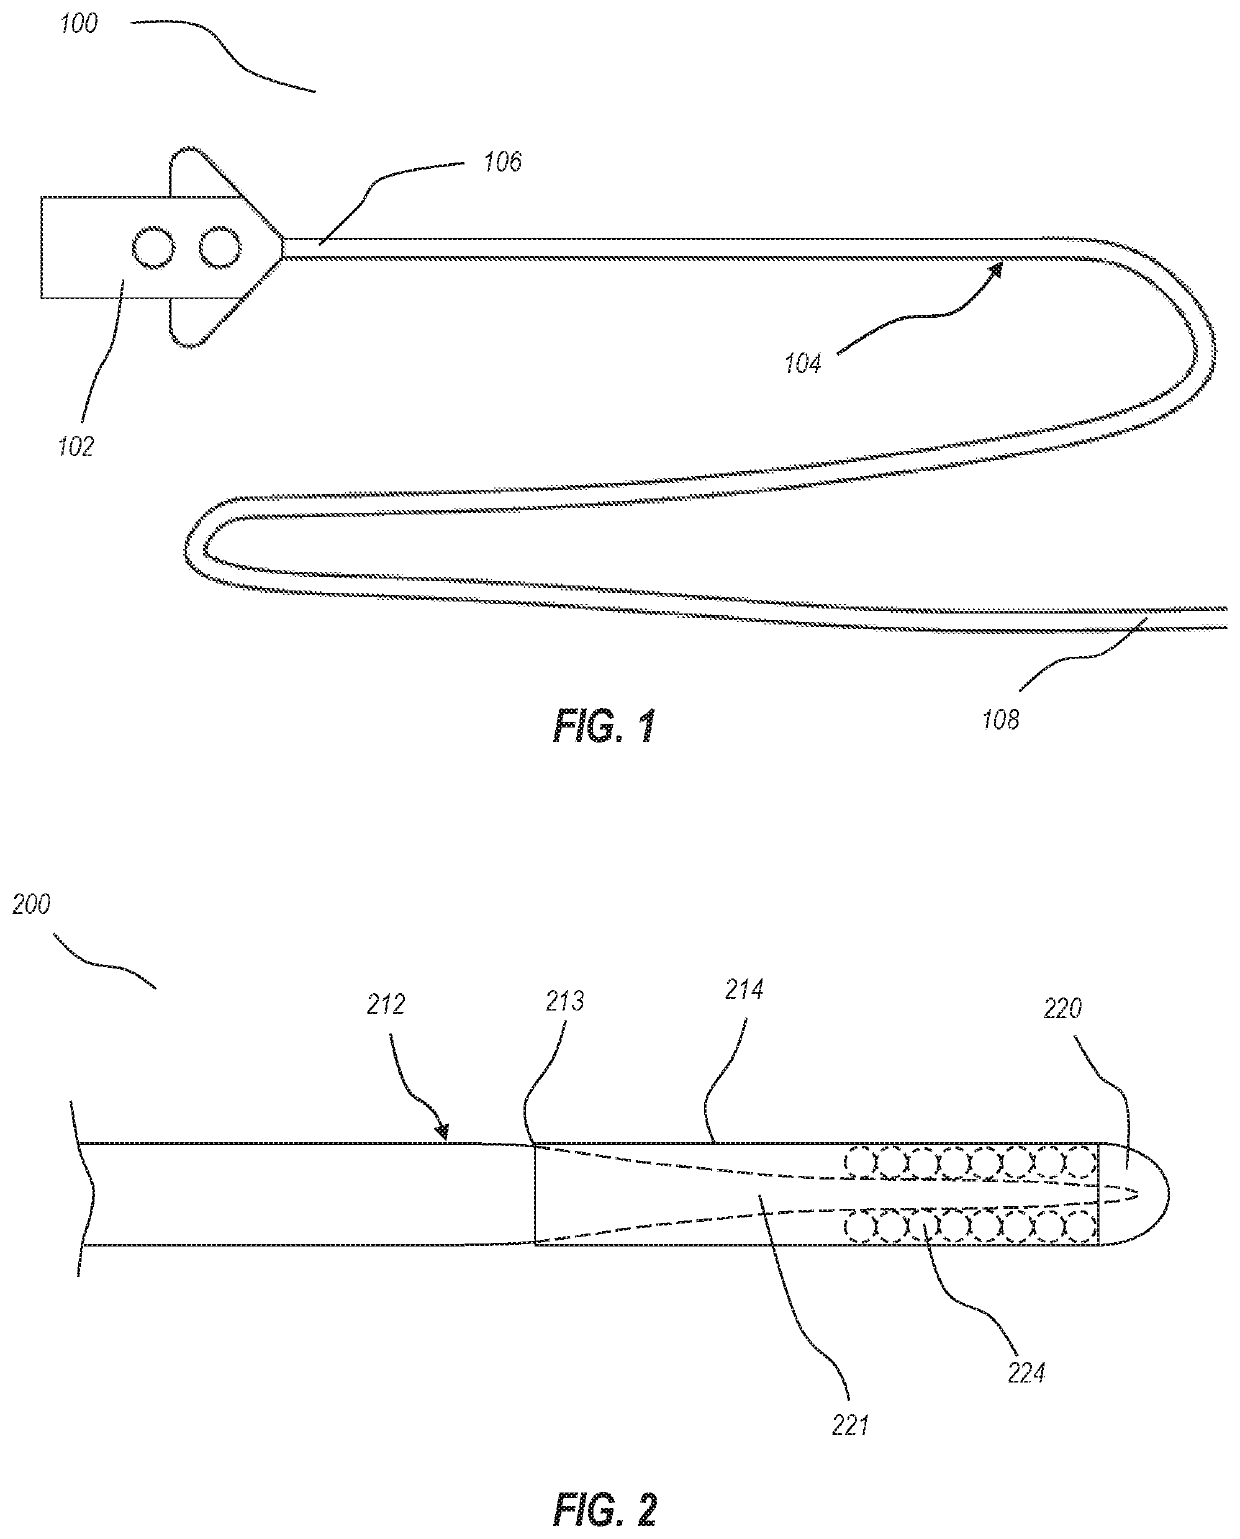 Micro-fabricated medical device having a non-helical cut arrangement